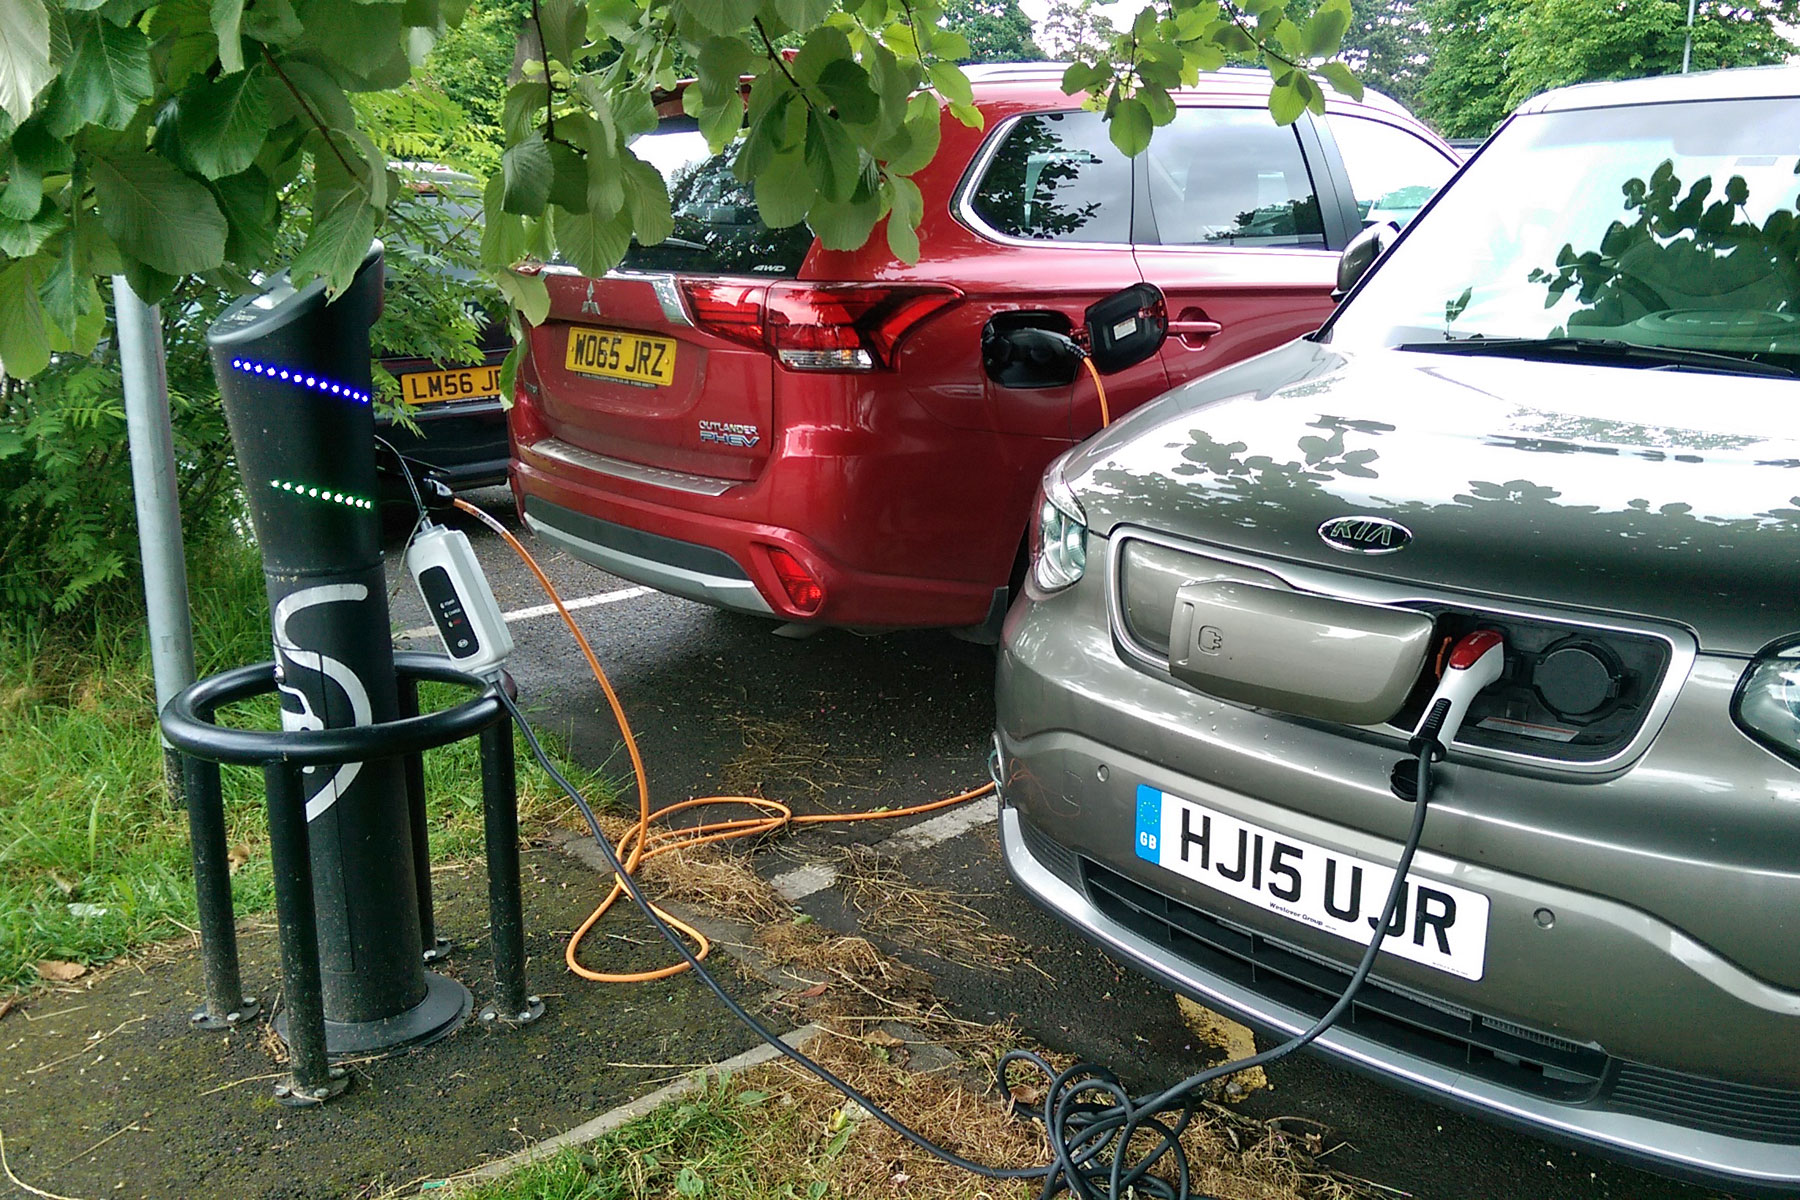 Month two: what’s the etiquette around charging?